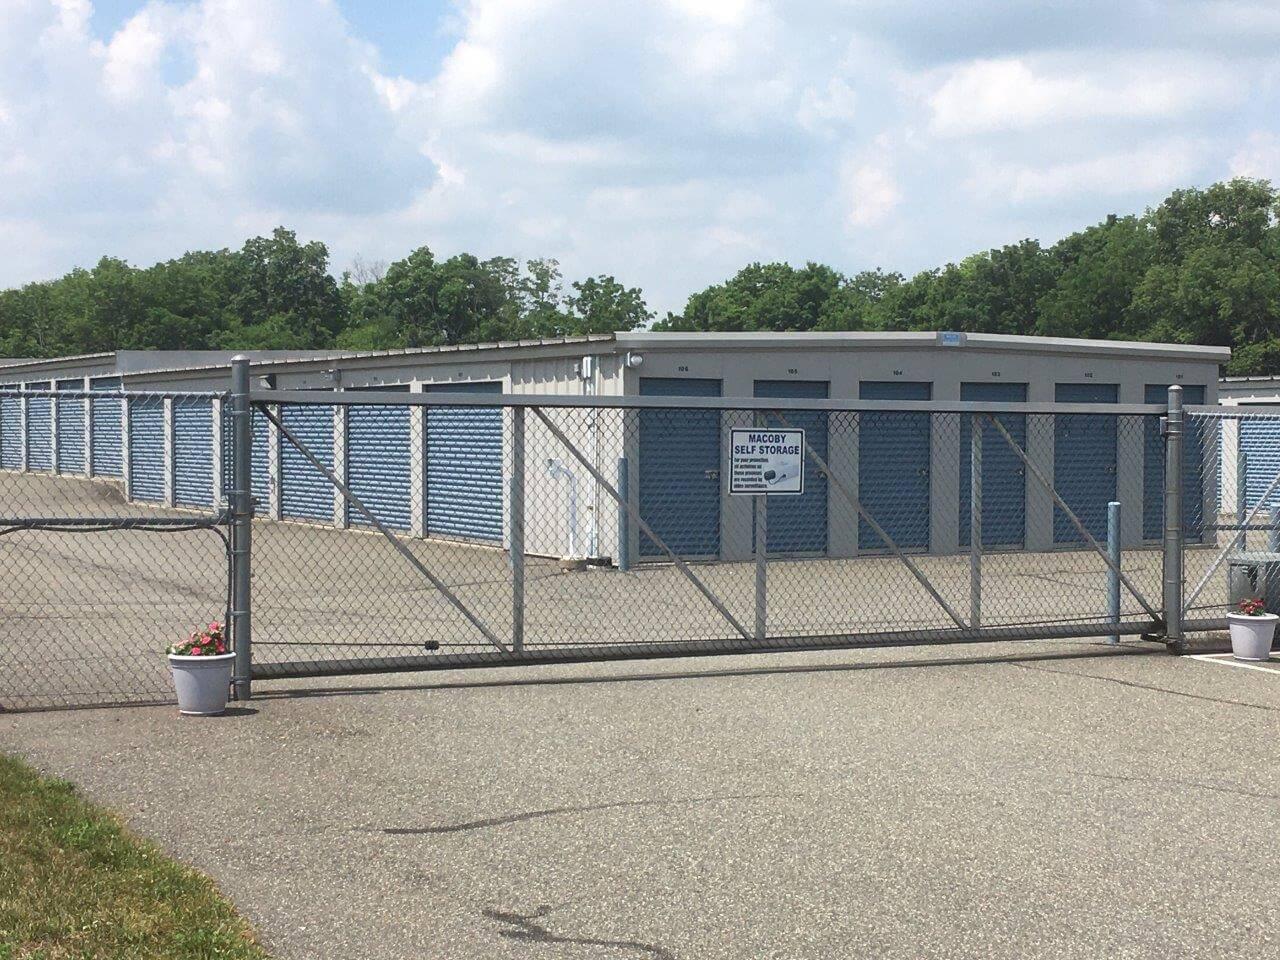 Macoby Self Storage - Gated Entrance to Storage Facility